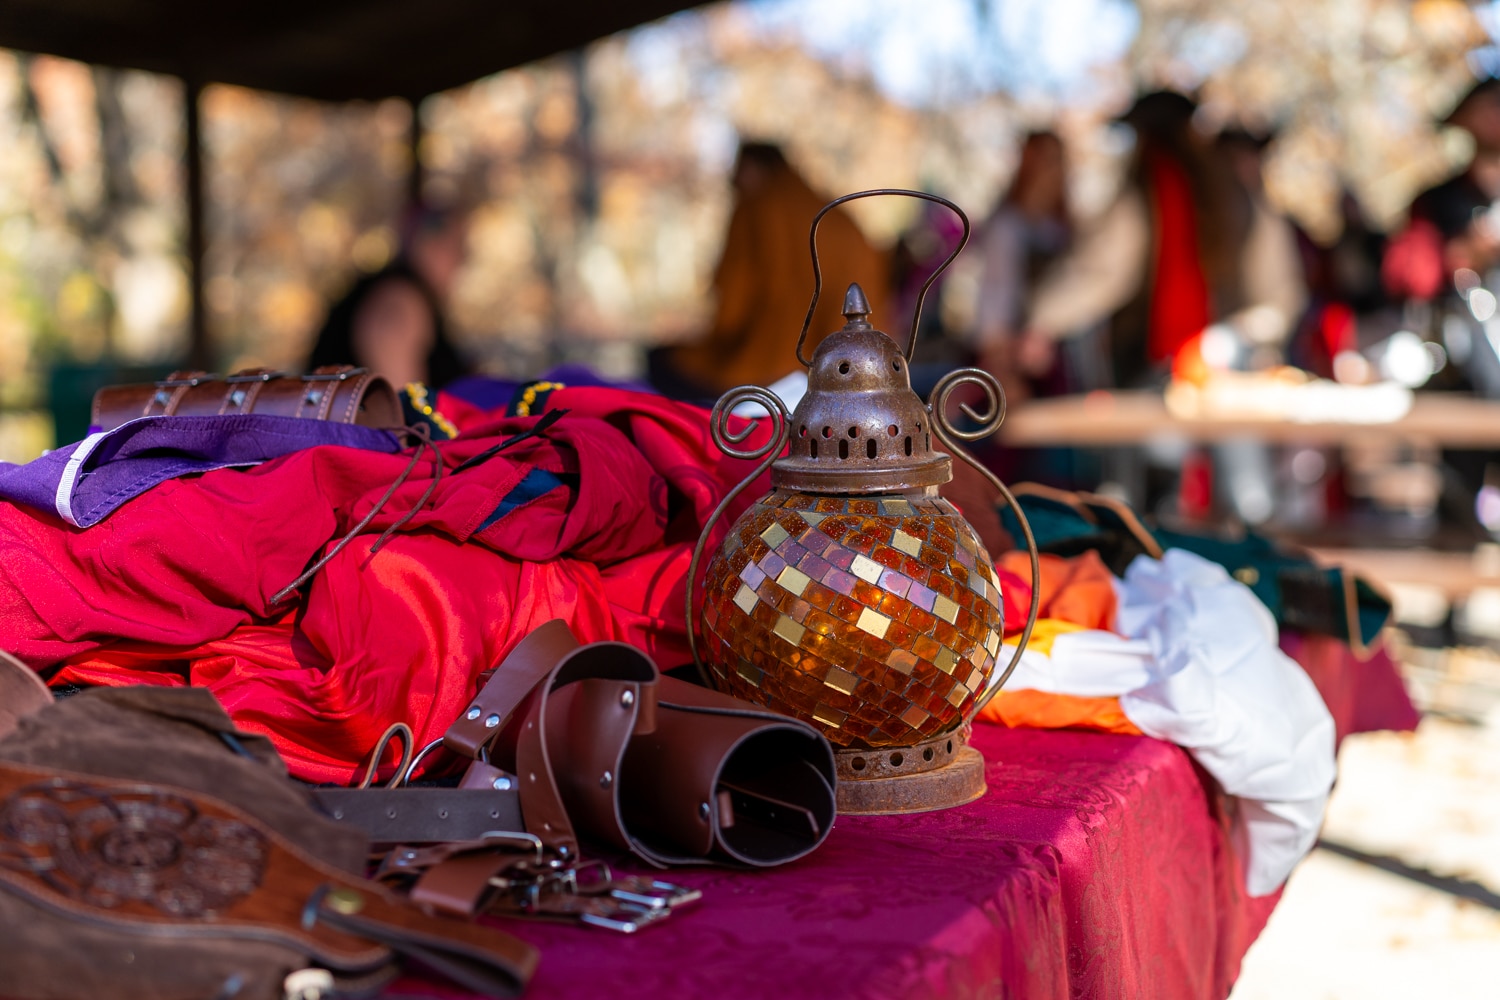 A small red and yellow glass lantern sits on a table with other costumes at the Arkansas Renaissance Festival.